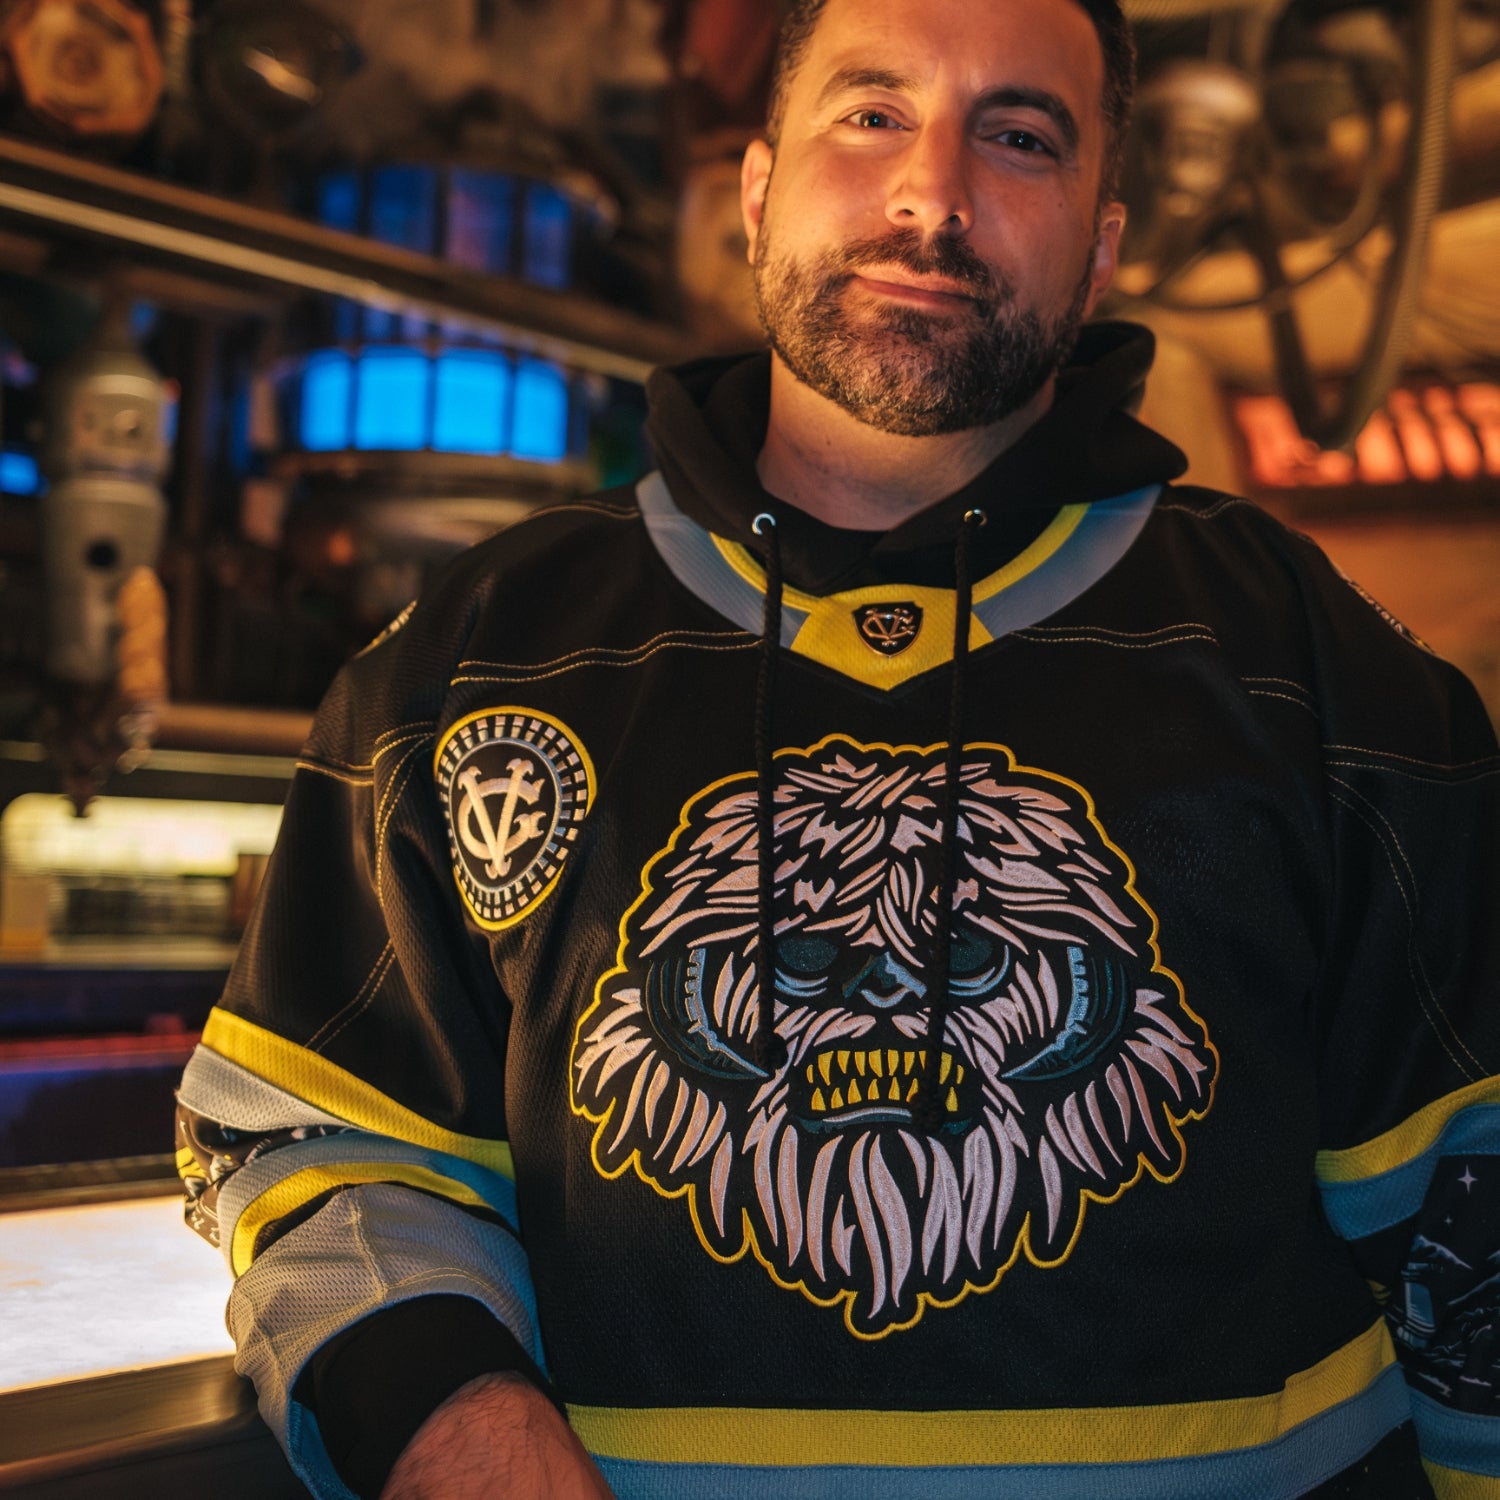 violent gentlemen hockey clothing company hockey club new star wars may the 4th releases - new Hoth hockey jersey, Hoth Star Wars Wampa t-shirt, tee, hoodie, and hockey socks. Learn more by checking out Orquest aedelweiss Hockey Apparel